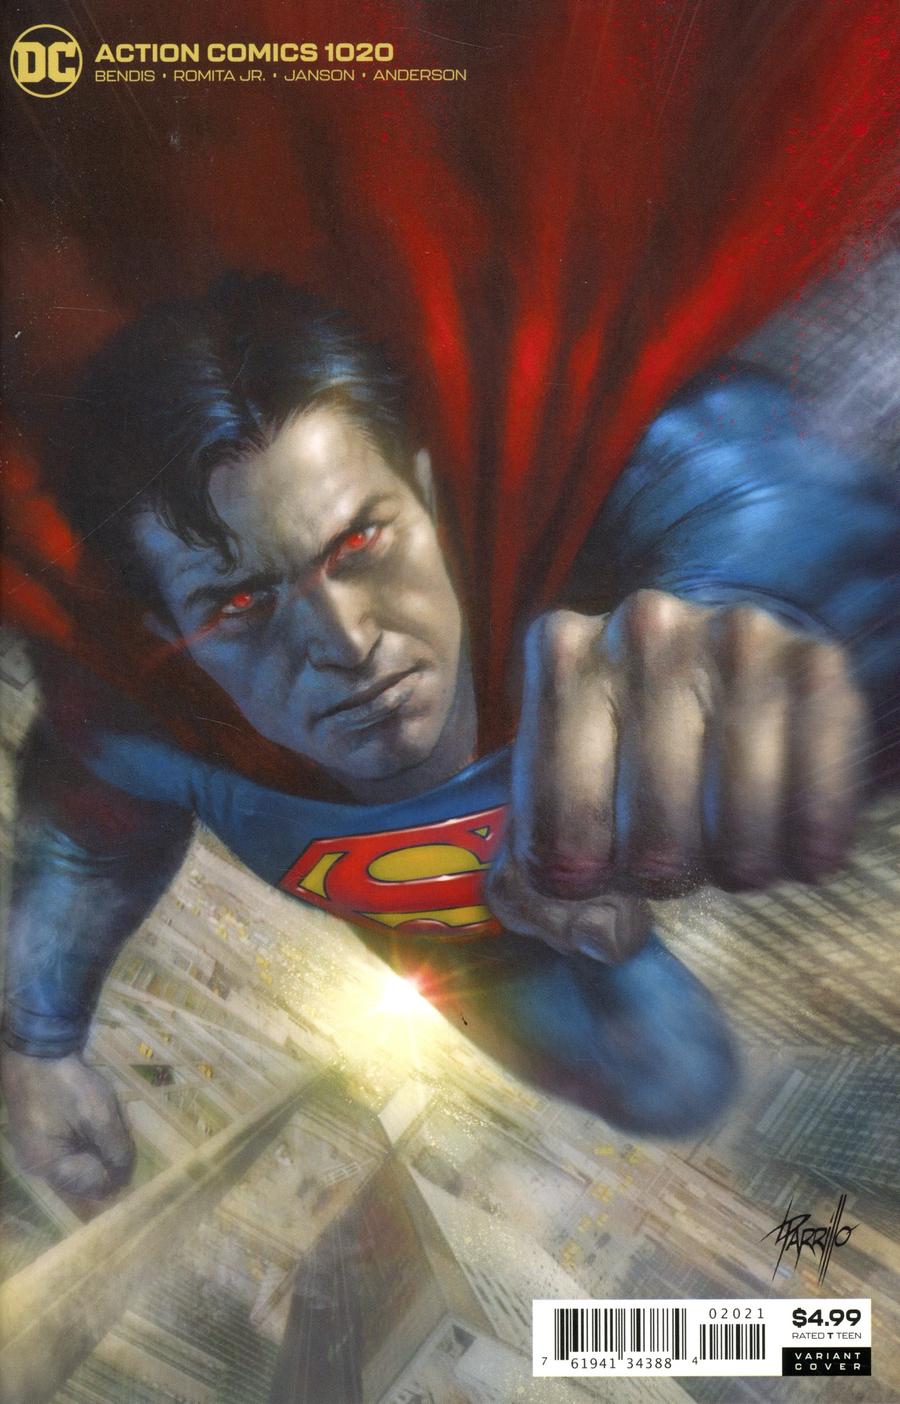 Action Comics Vol 2 #1020 Cover B Variant Lucio Parrillo Card Stock Cover